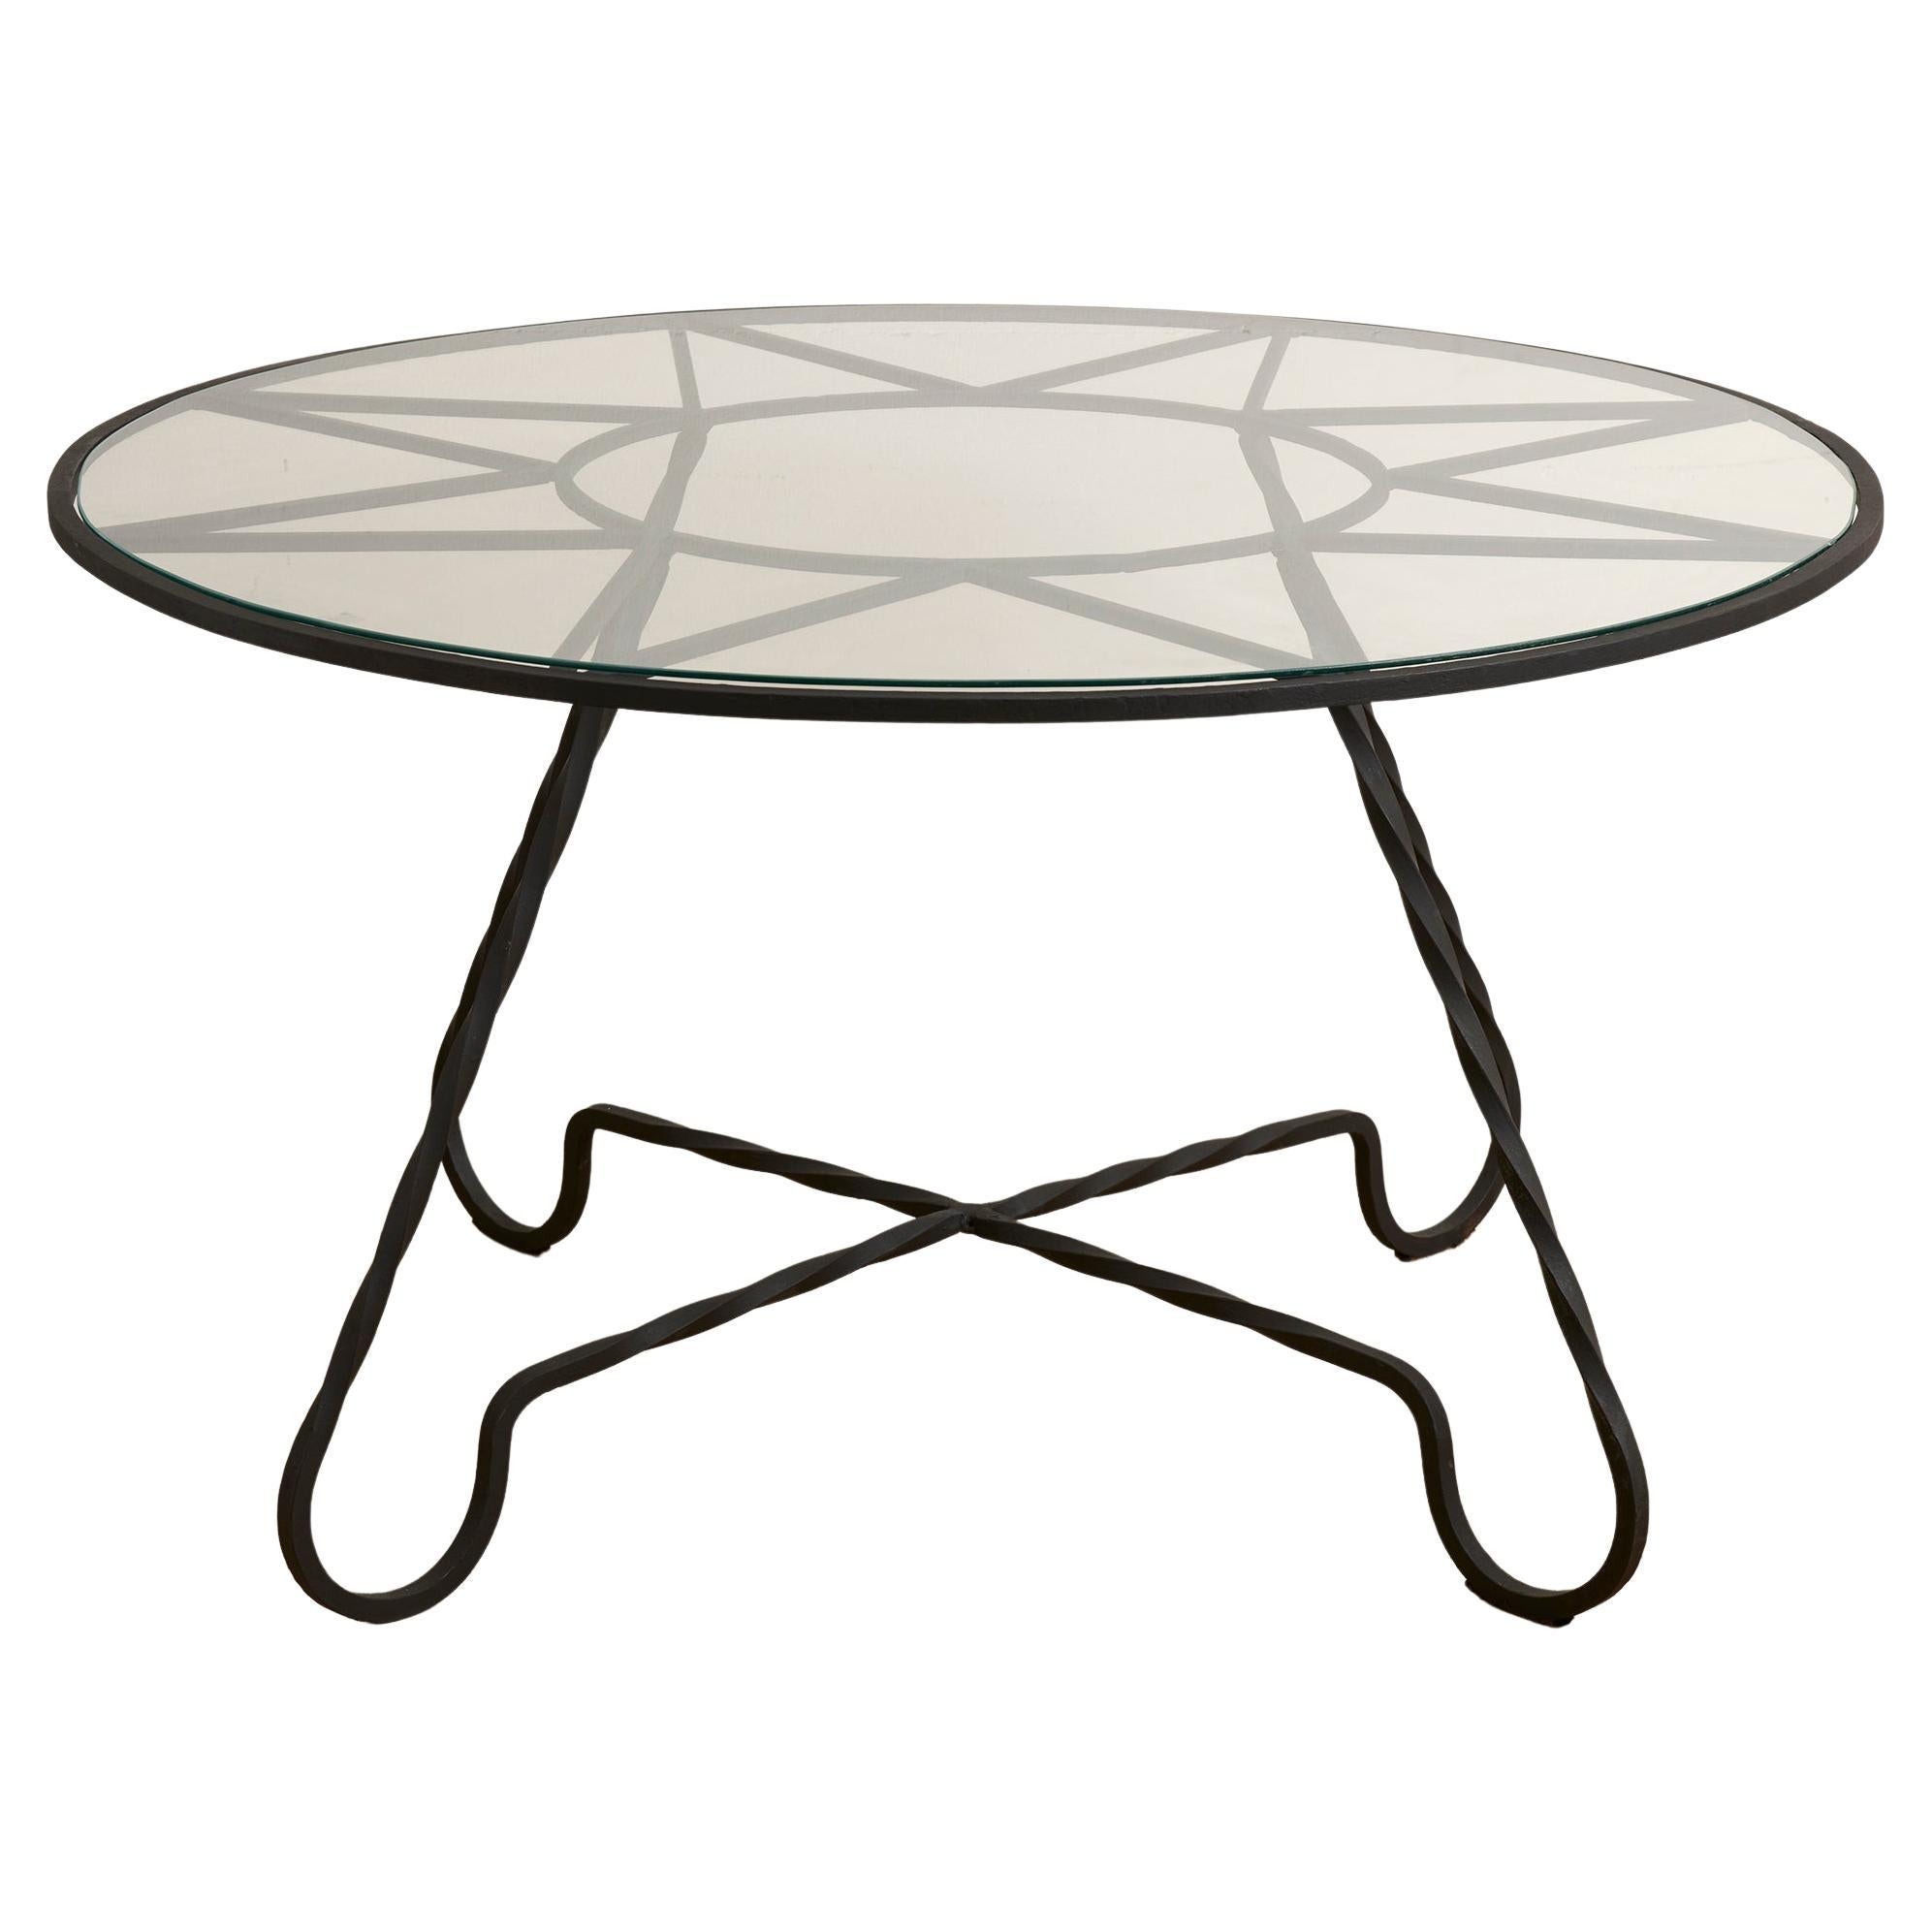 Circular, Black Steel Coffee Table, Glass Top, 'Jean Royere Style' France, 1950s